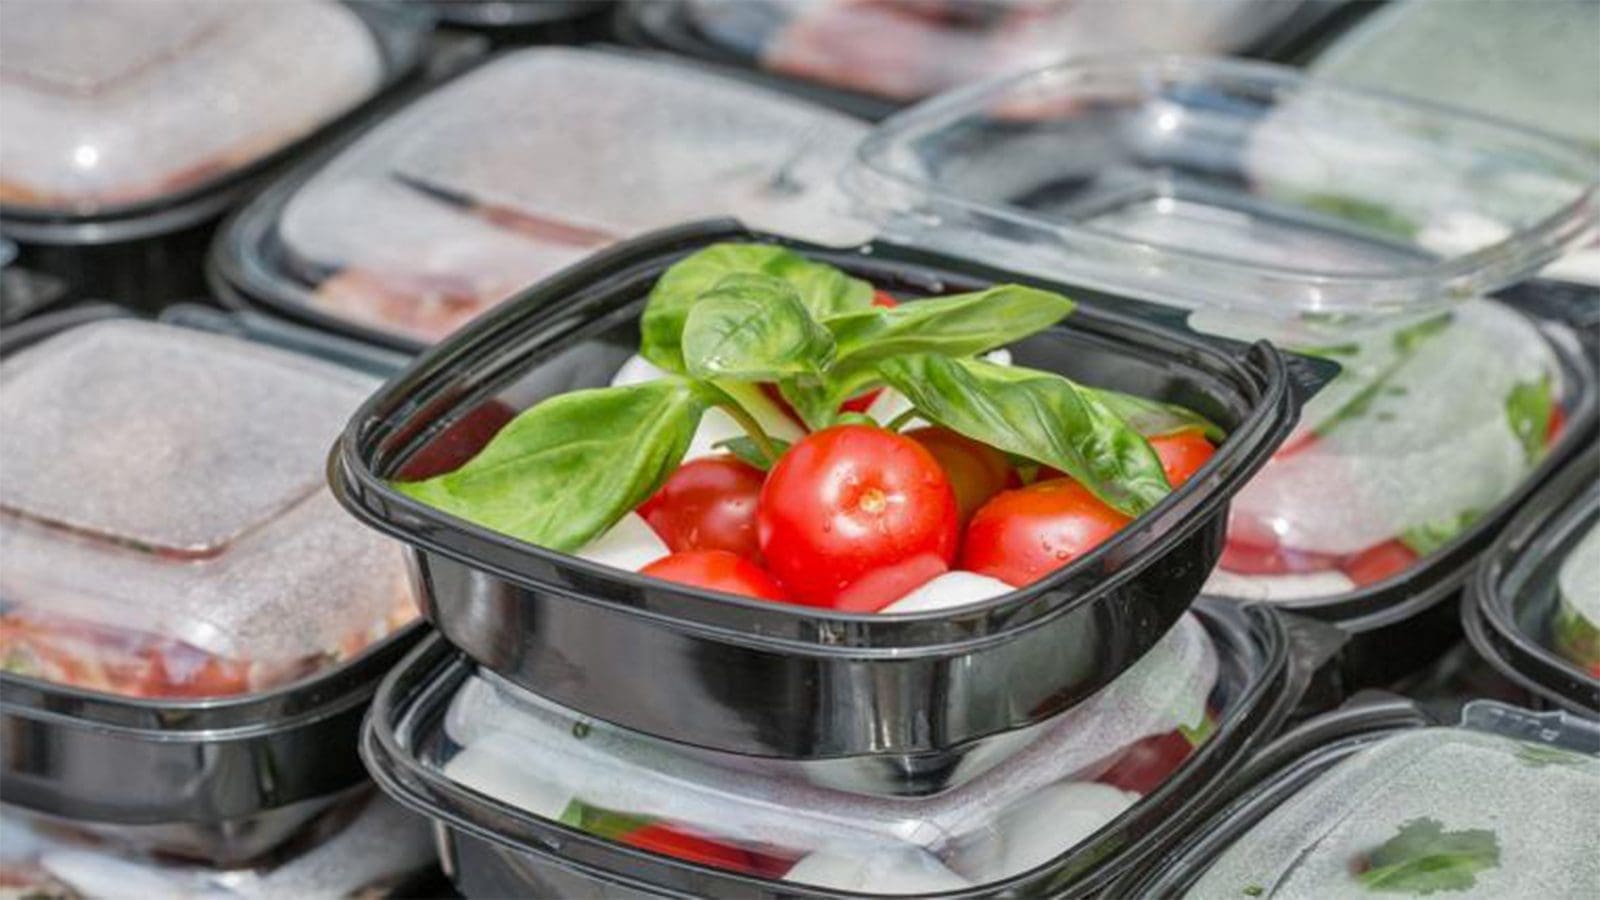 Public groups call on FDA to restrict BPA in food packaging, raise concerns on human health